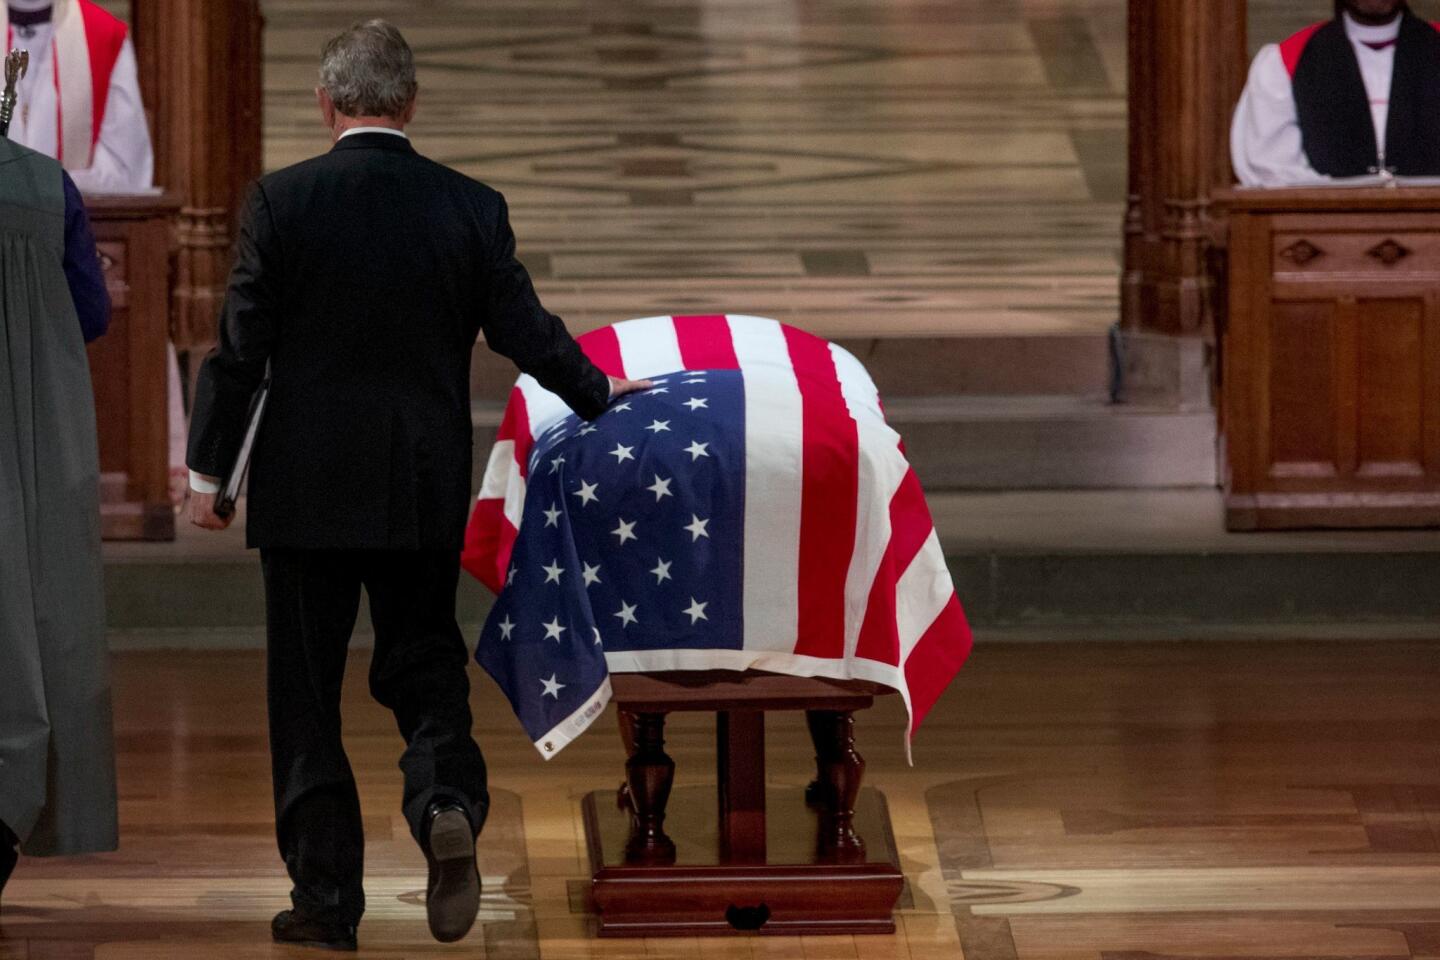 Funeral for President George H. W. Bush